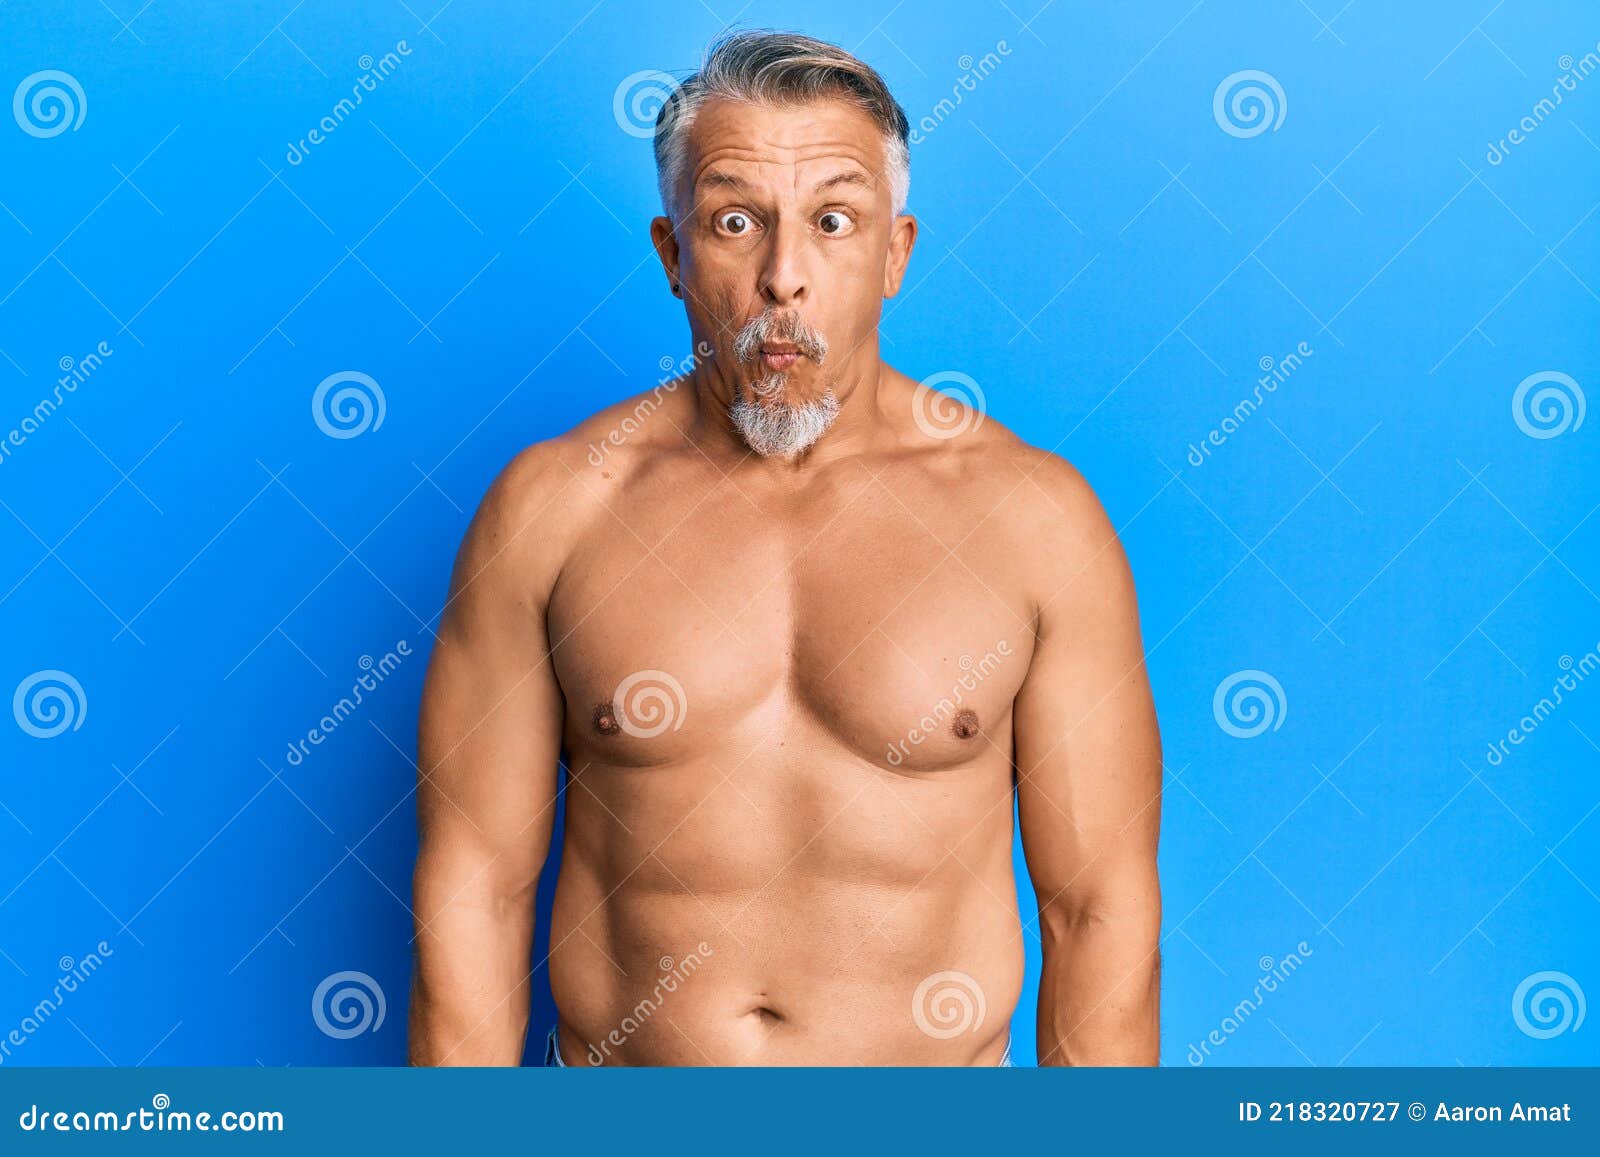 Middle Age Grey-haired Man Standing Shirtless Making Fish Face